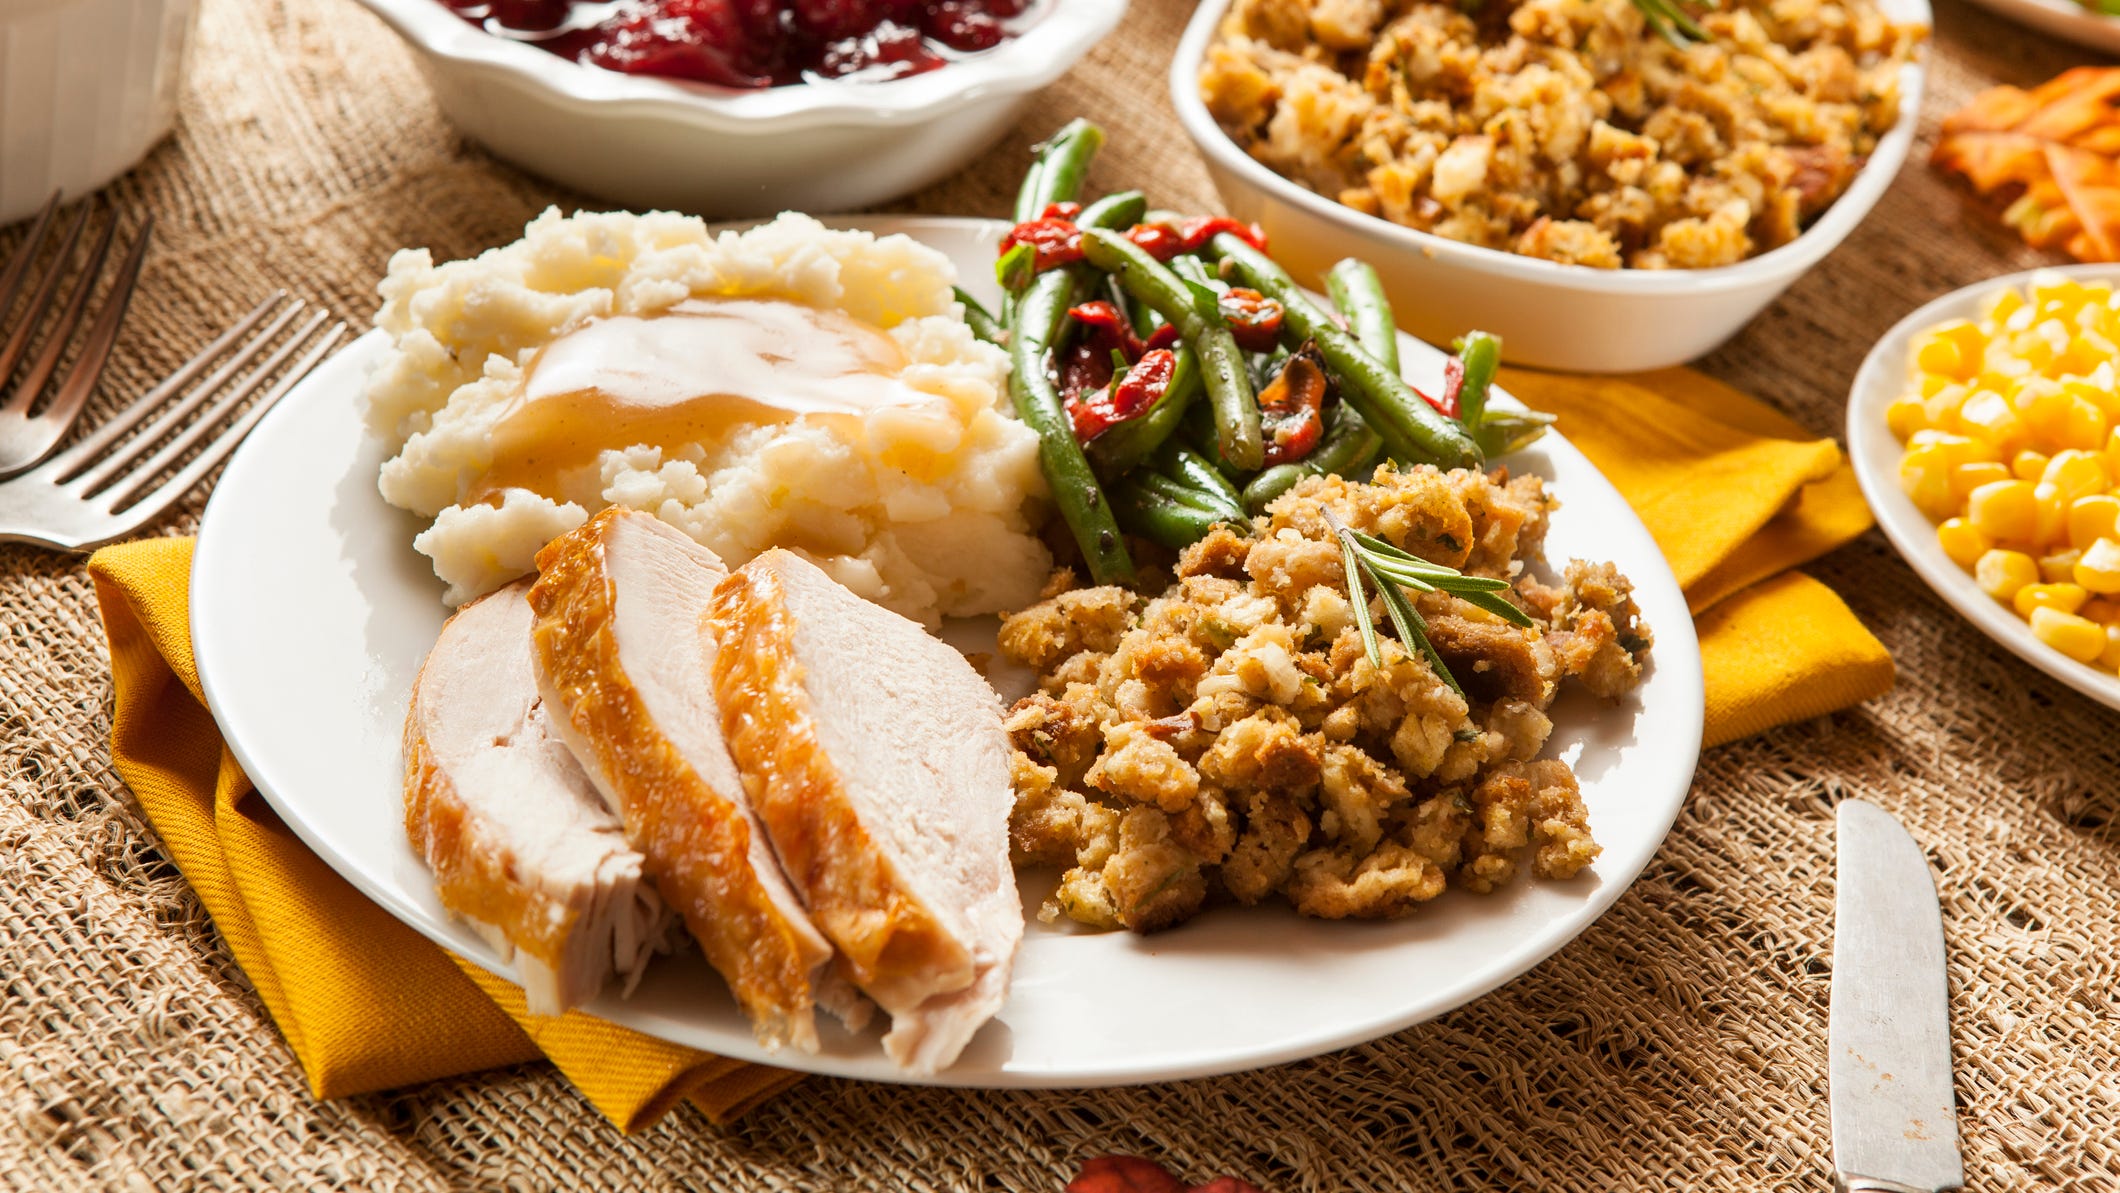 The Buzz: Thanksgiving Day dining options in greater Appleton area